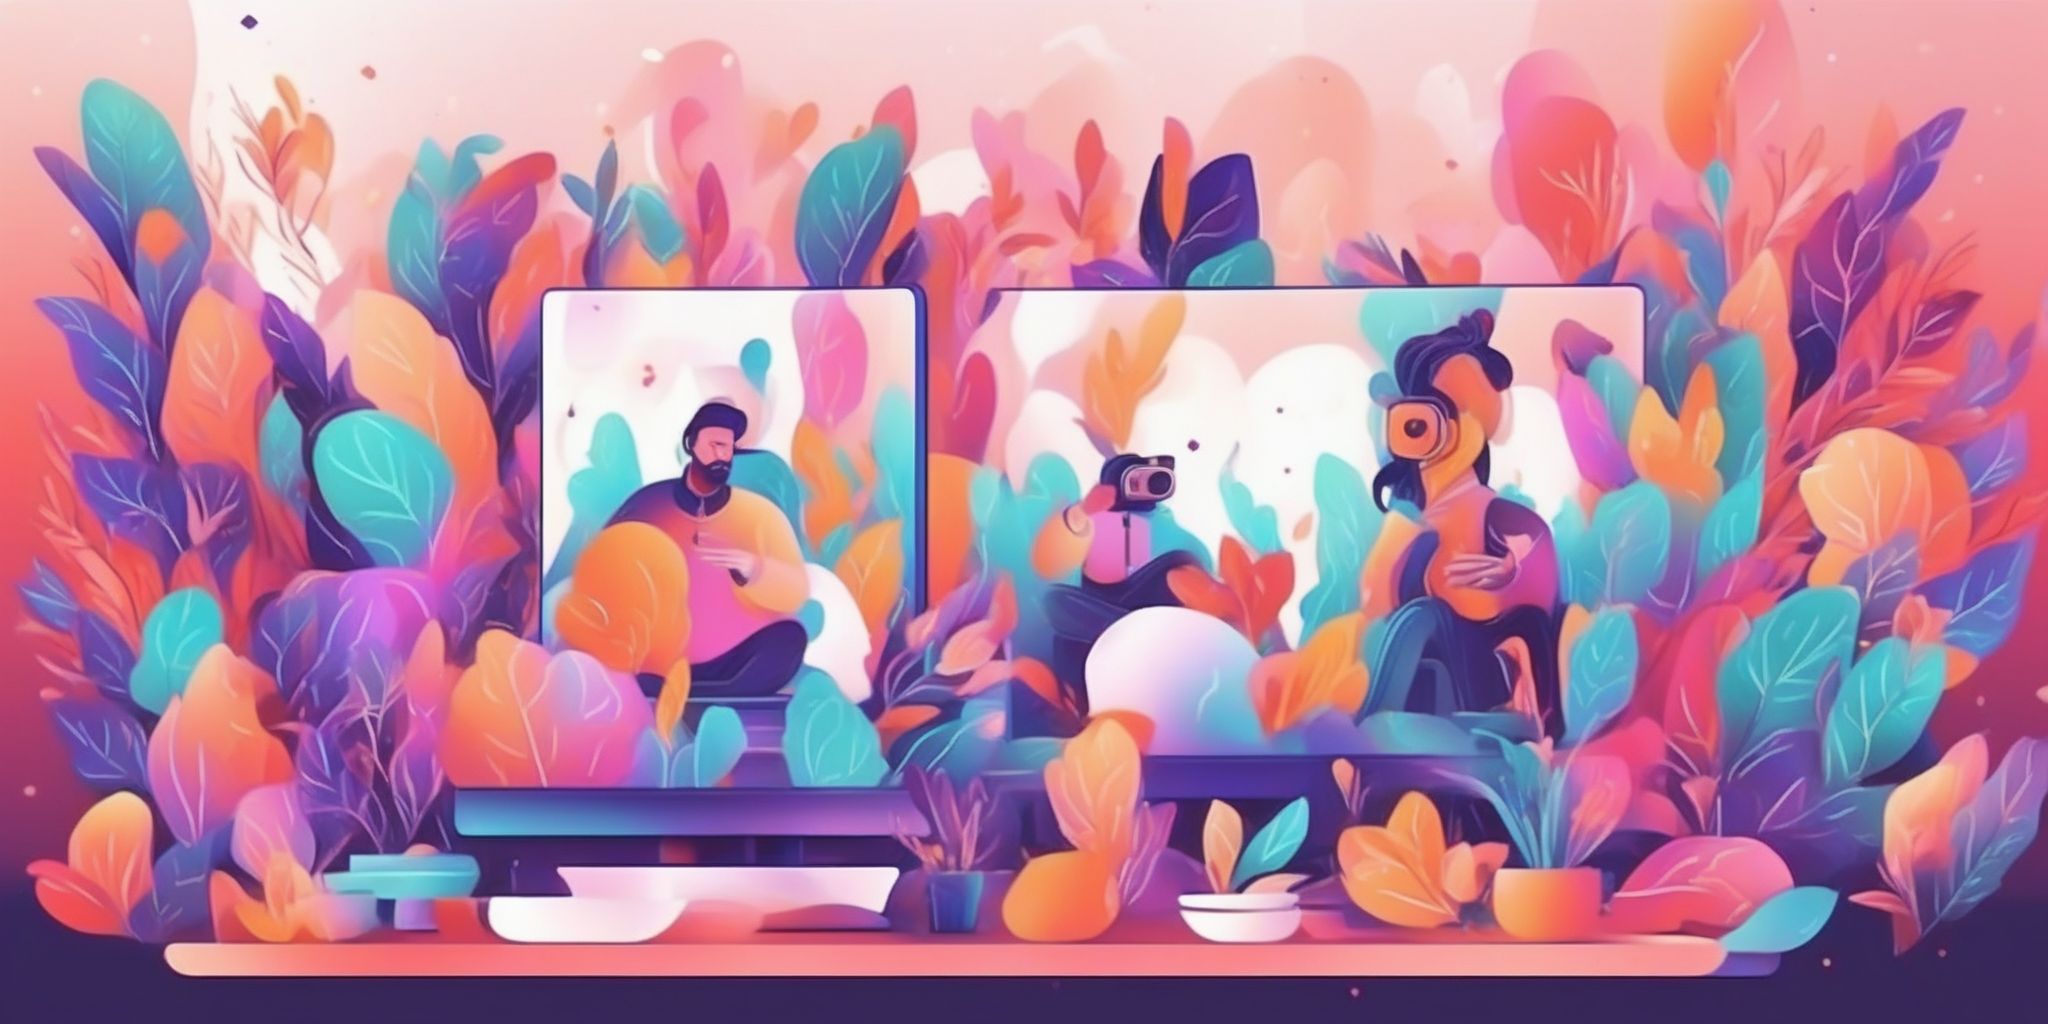 Live streaming in illustration style with gradients and white background